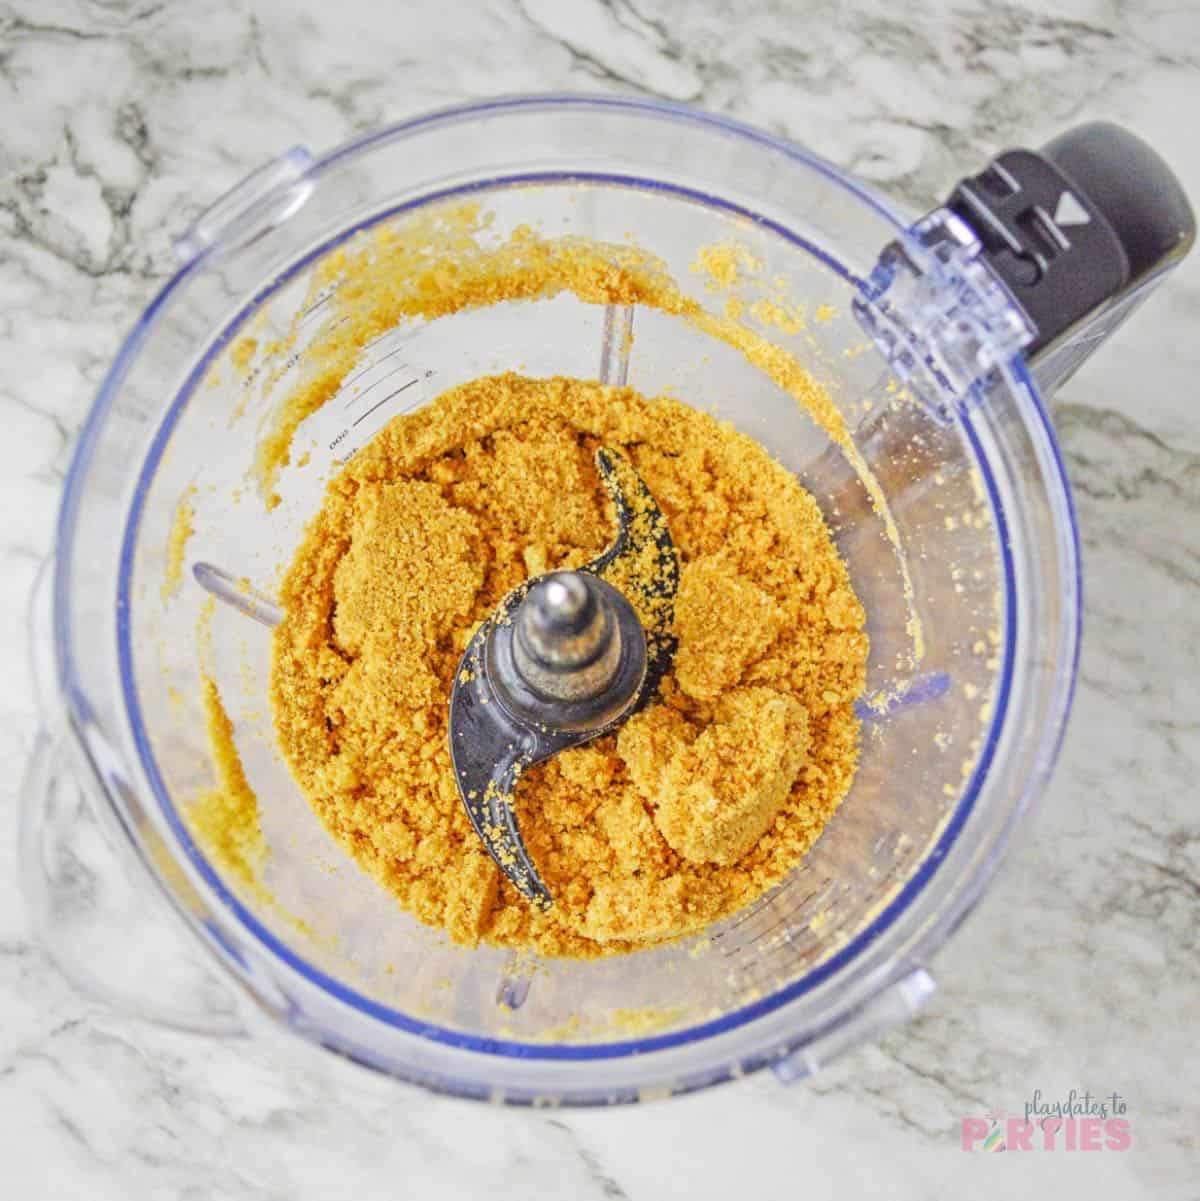 Graham cracker crumbs are made by pulsing them in a food processor until ground.